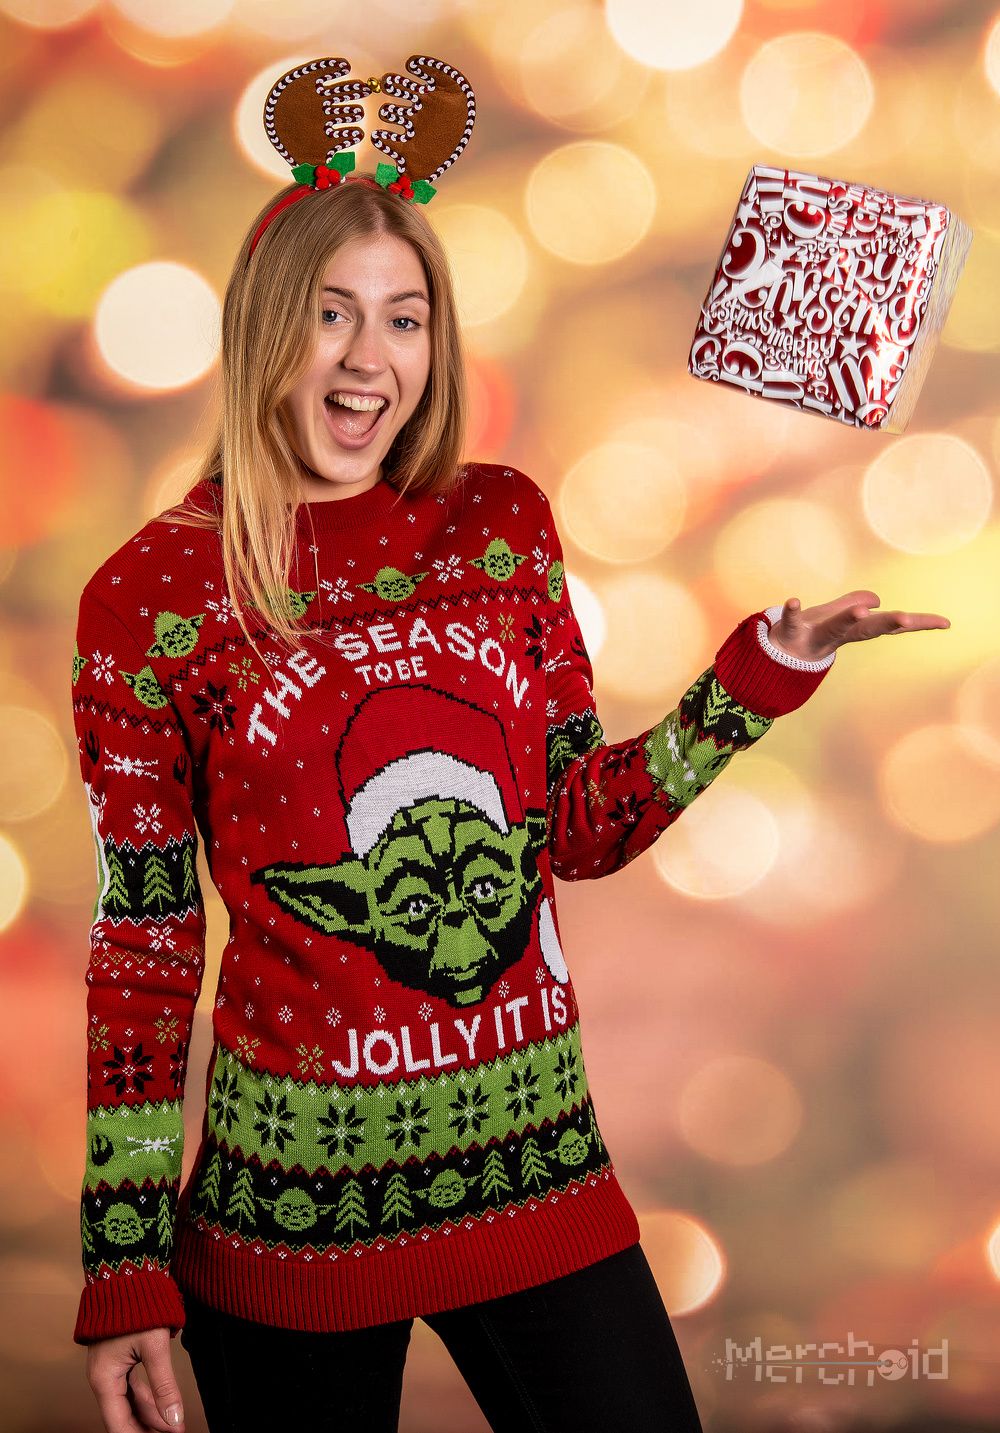 SW The Season To Be Jolly It Is Christmas Sweater/Jumper 3